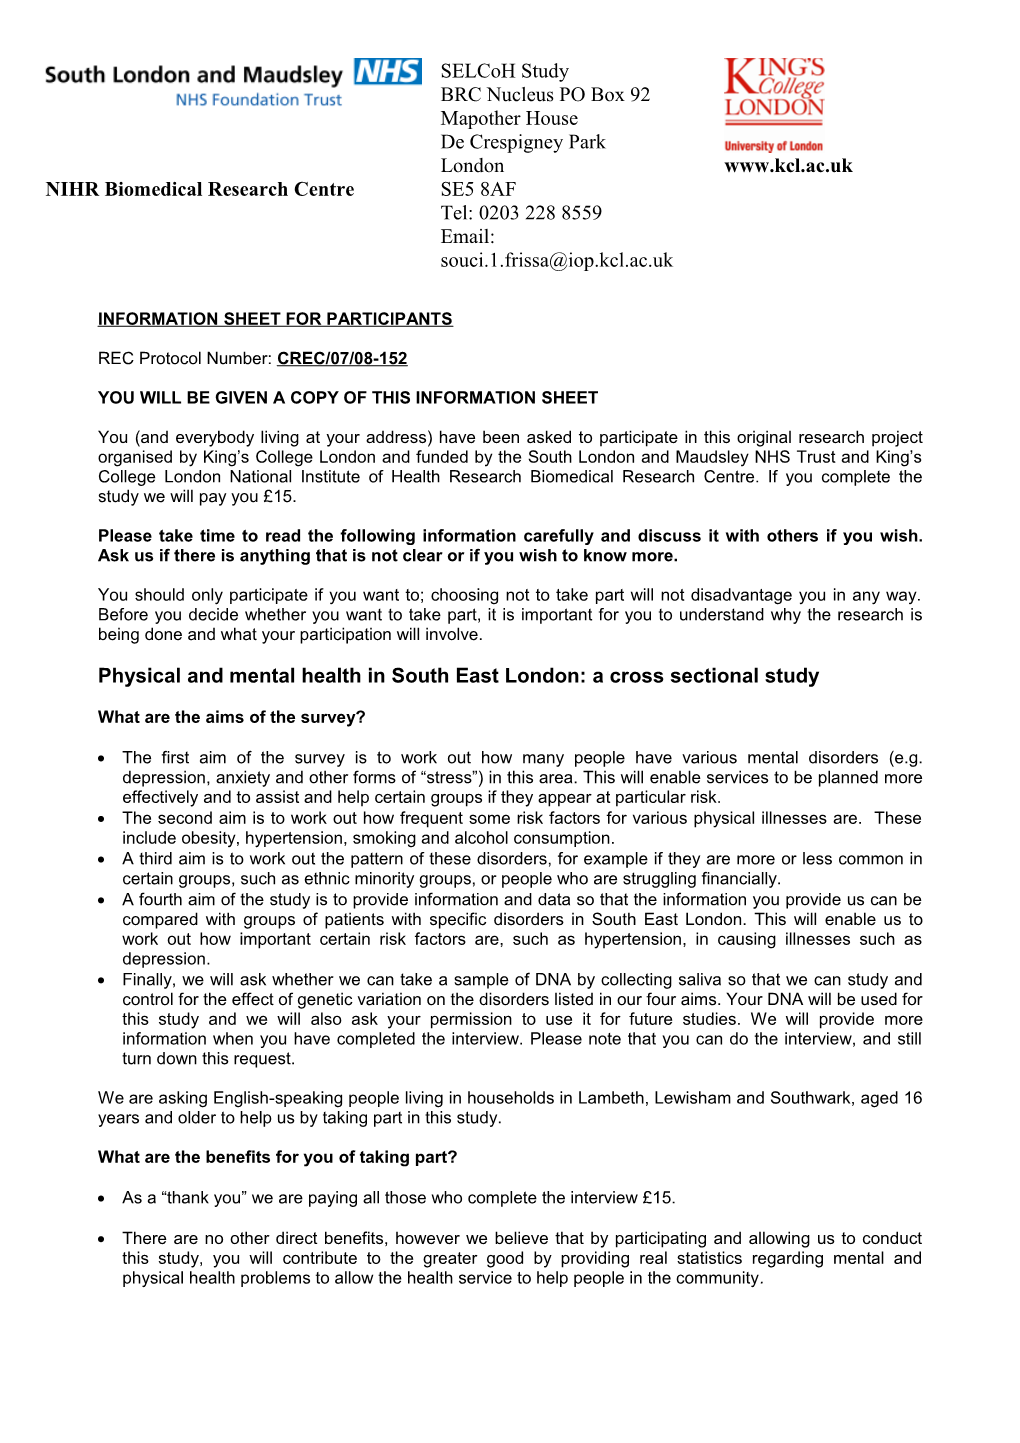 Information Sheet: Survey of Mental Well-Being in South East London